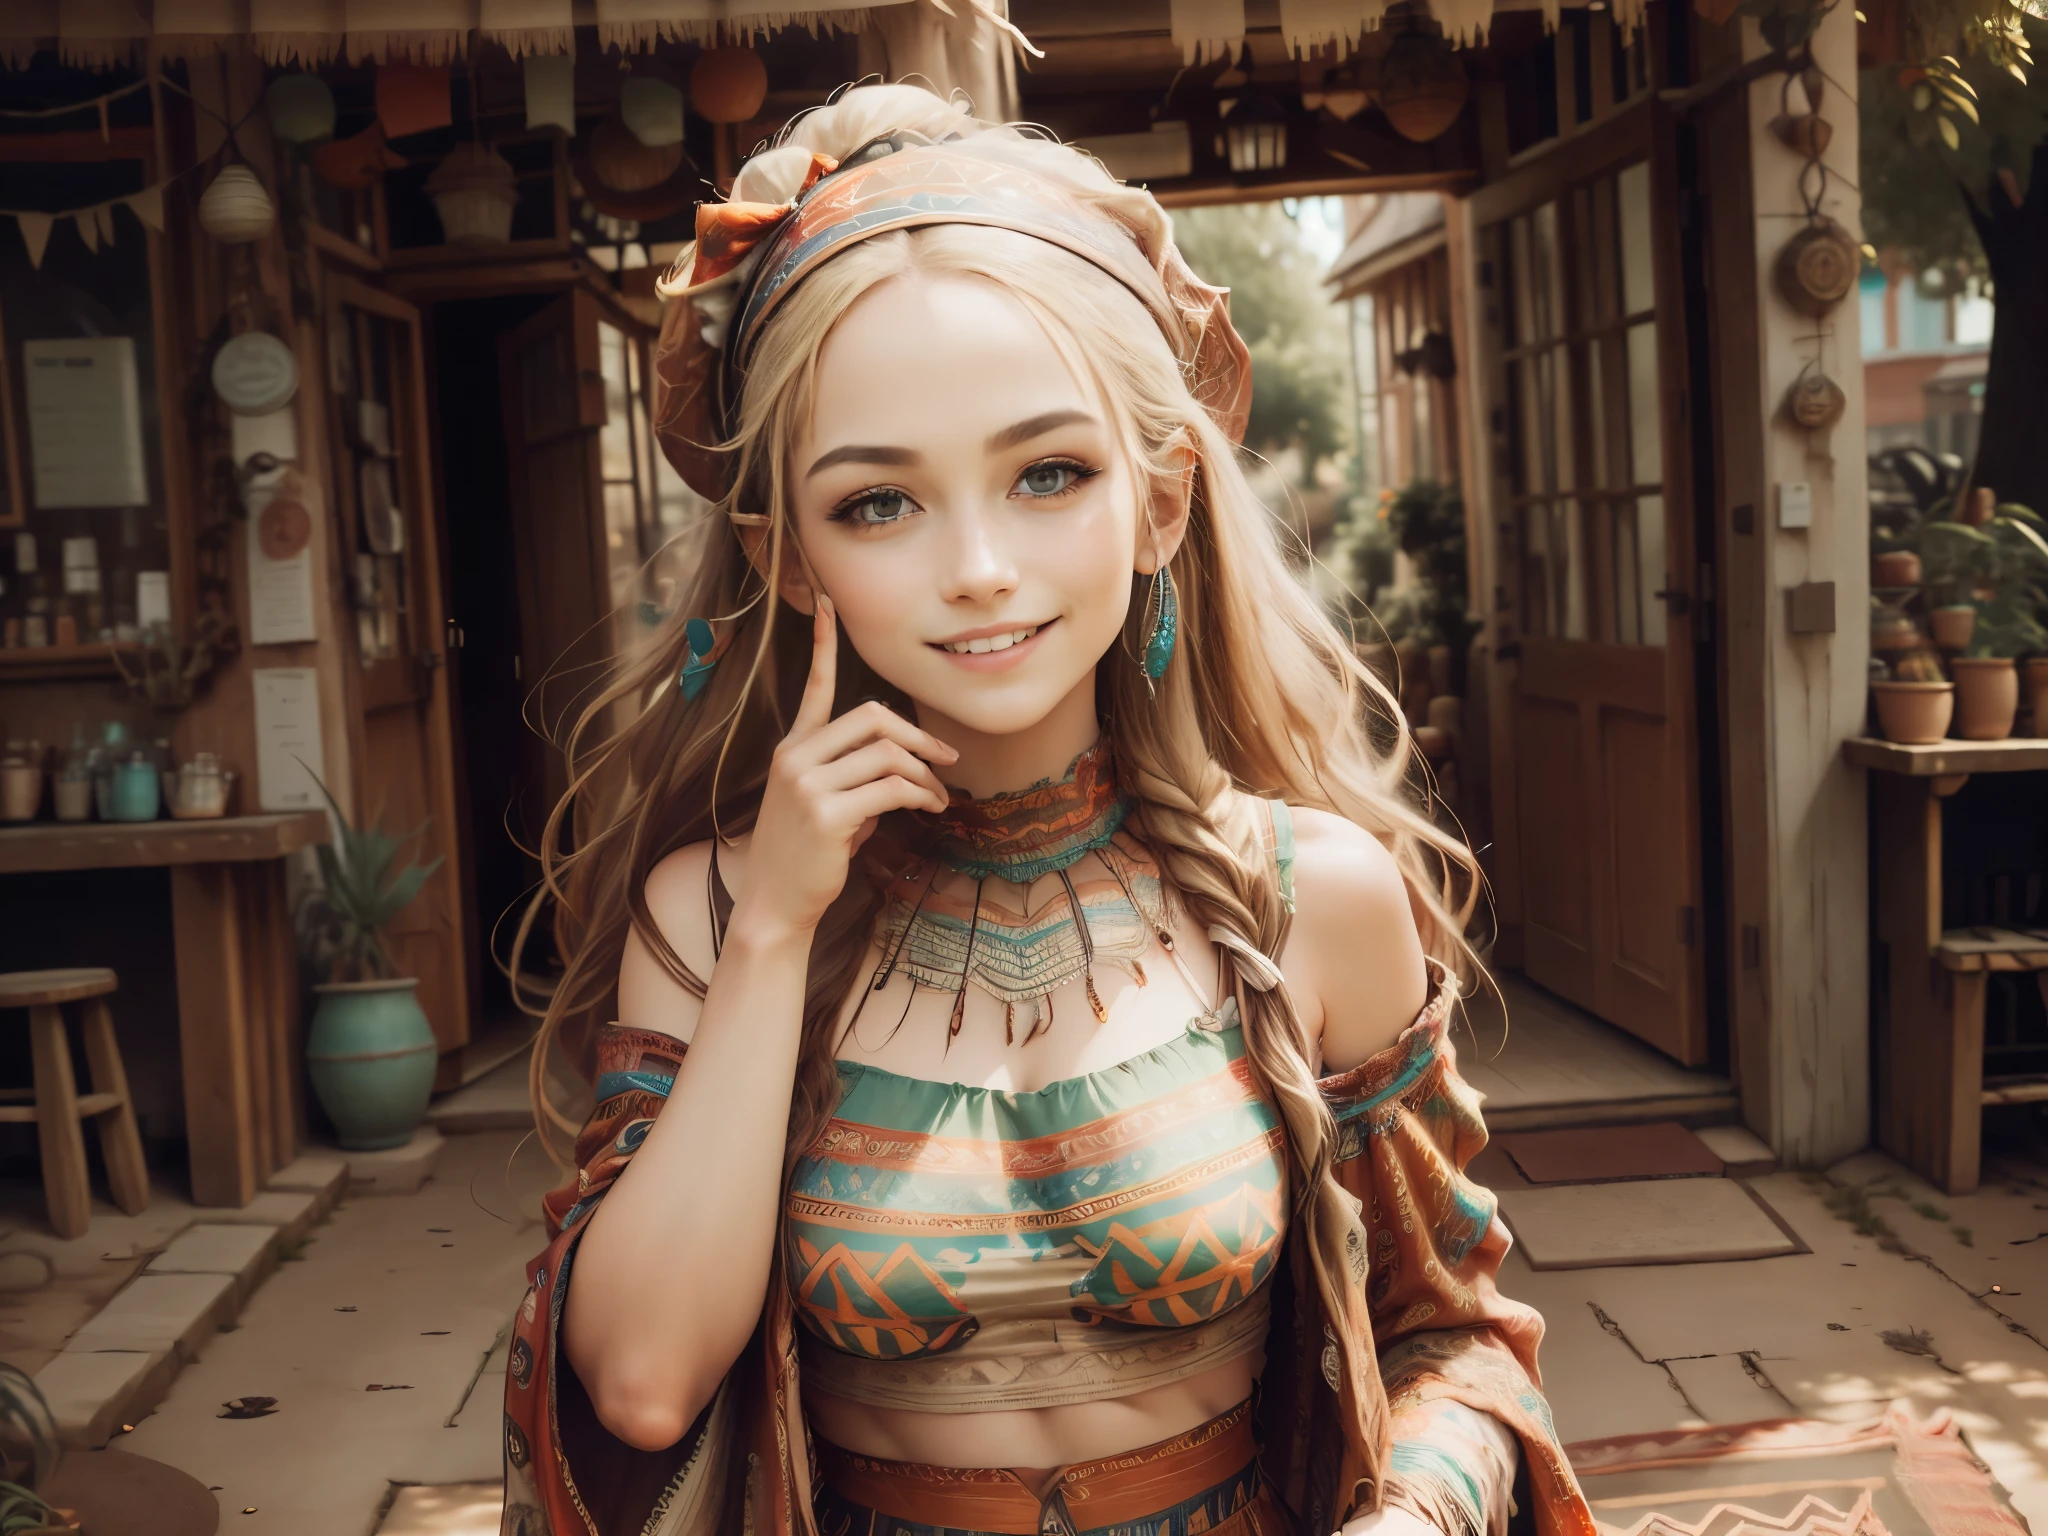 Full Shot, Full Body: 1.4, Unreal Engine: 1.4, Ultra Realistic, Photorealistic CG K: 1.4, Skin Texture: 1.4, Masterpiece: 1.4, ((Beautiful woman in hippie style hat, hippie clothes, happy, beautiful smile and perfect, subtle, making funny gestures: 1.5)), bohemian Hippie truck: 1.7, long hair, hippie clothes of various colors, 32k.